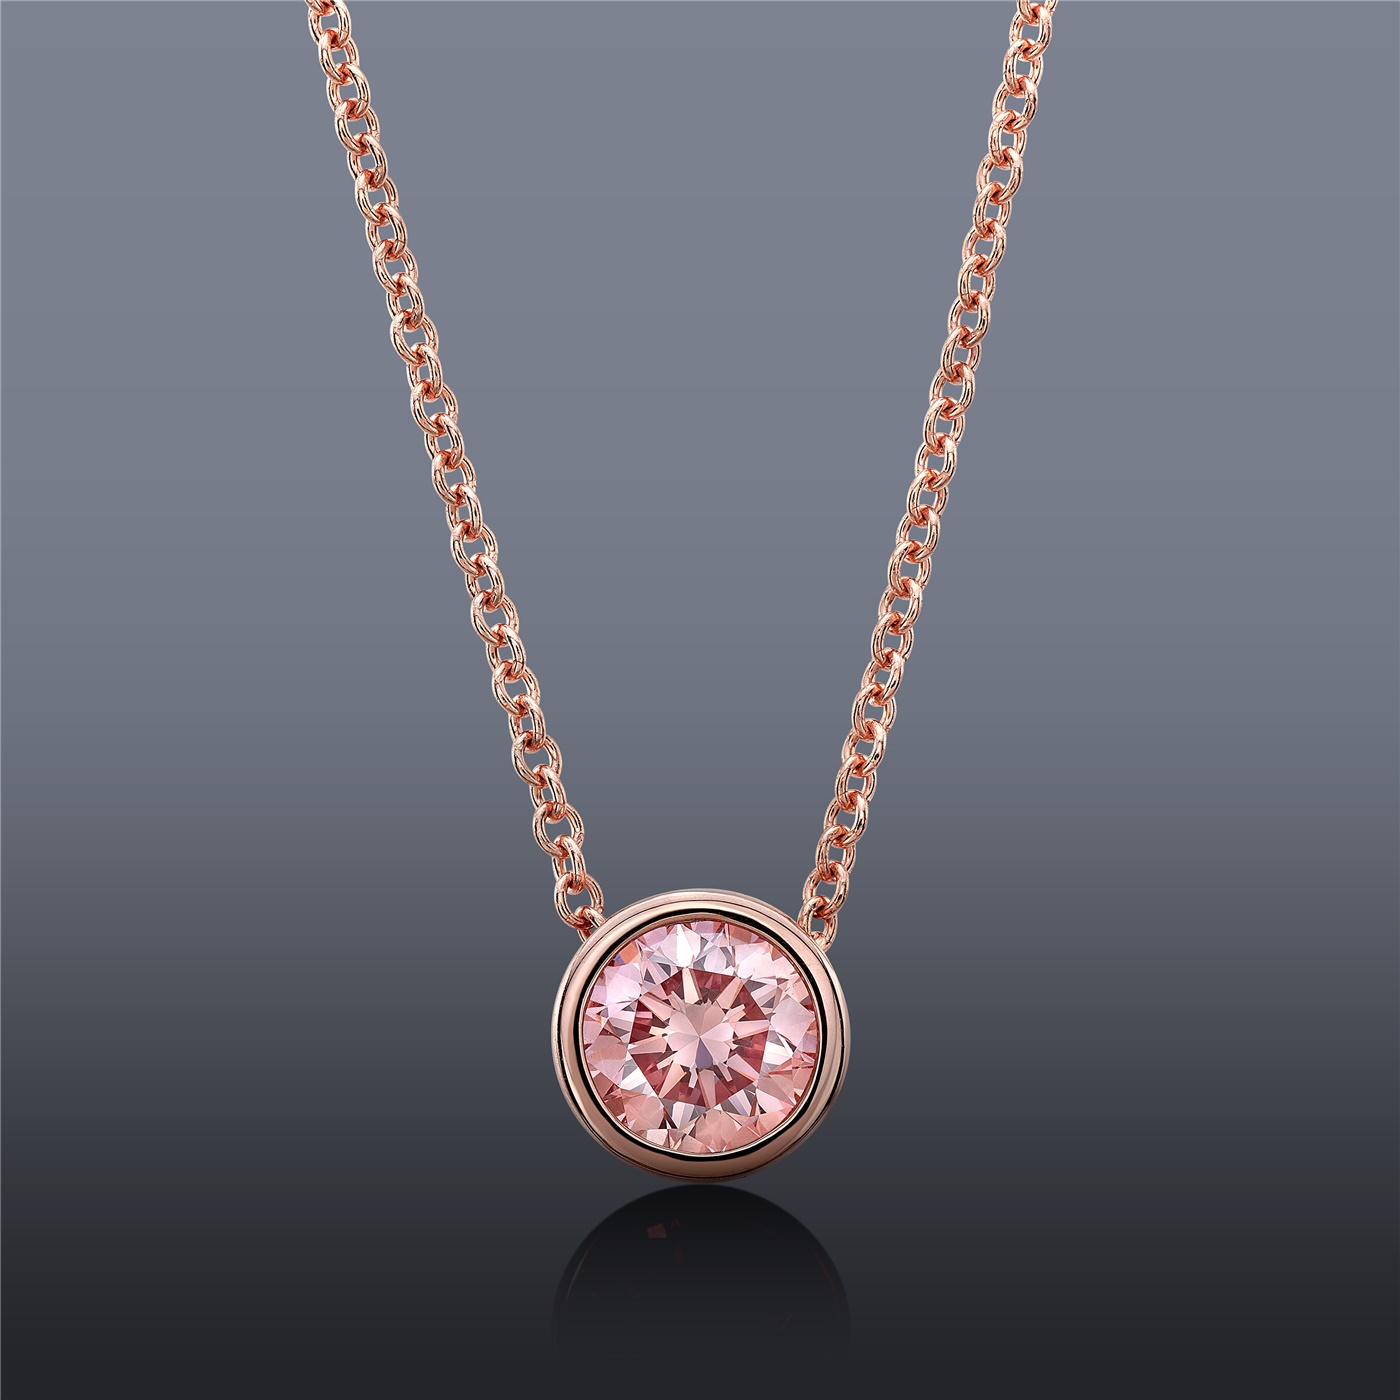 .55ct Fancy Pink Diamond Solitaire Necklace in 14K Rose Gold (stunning!)